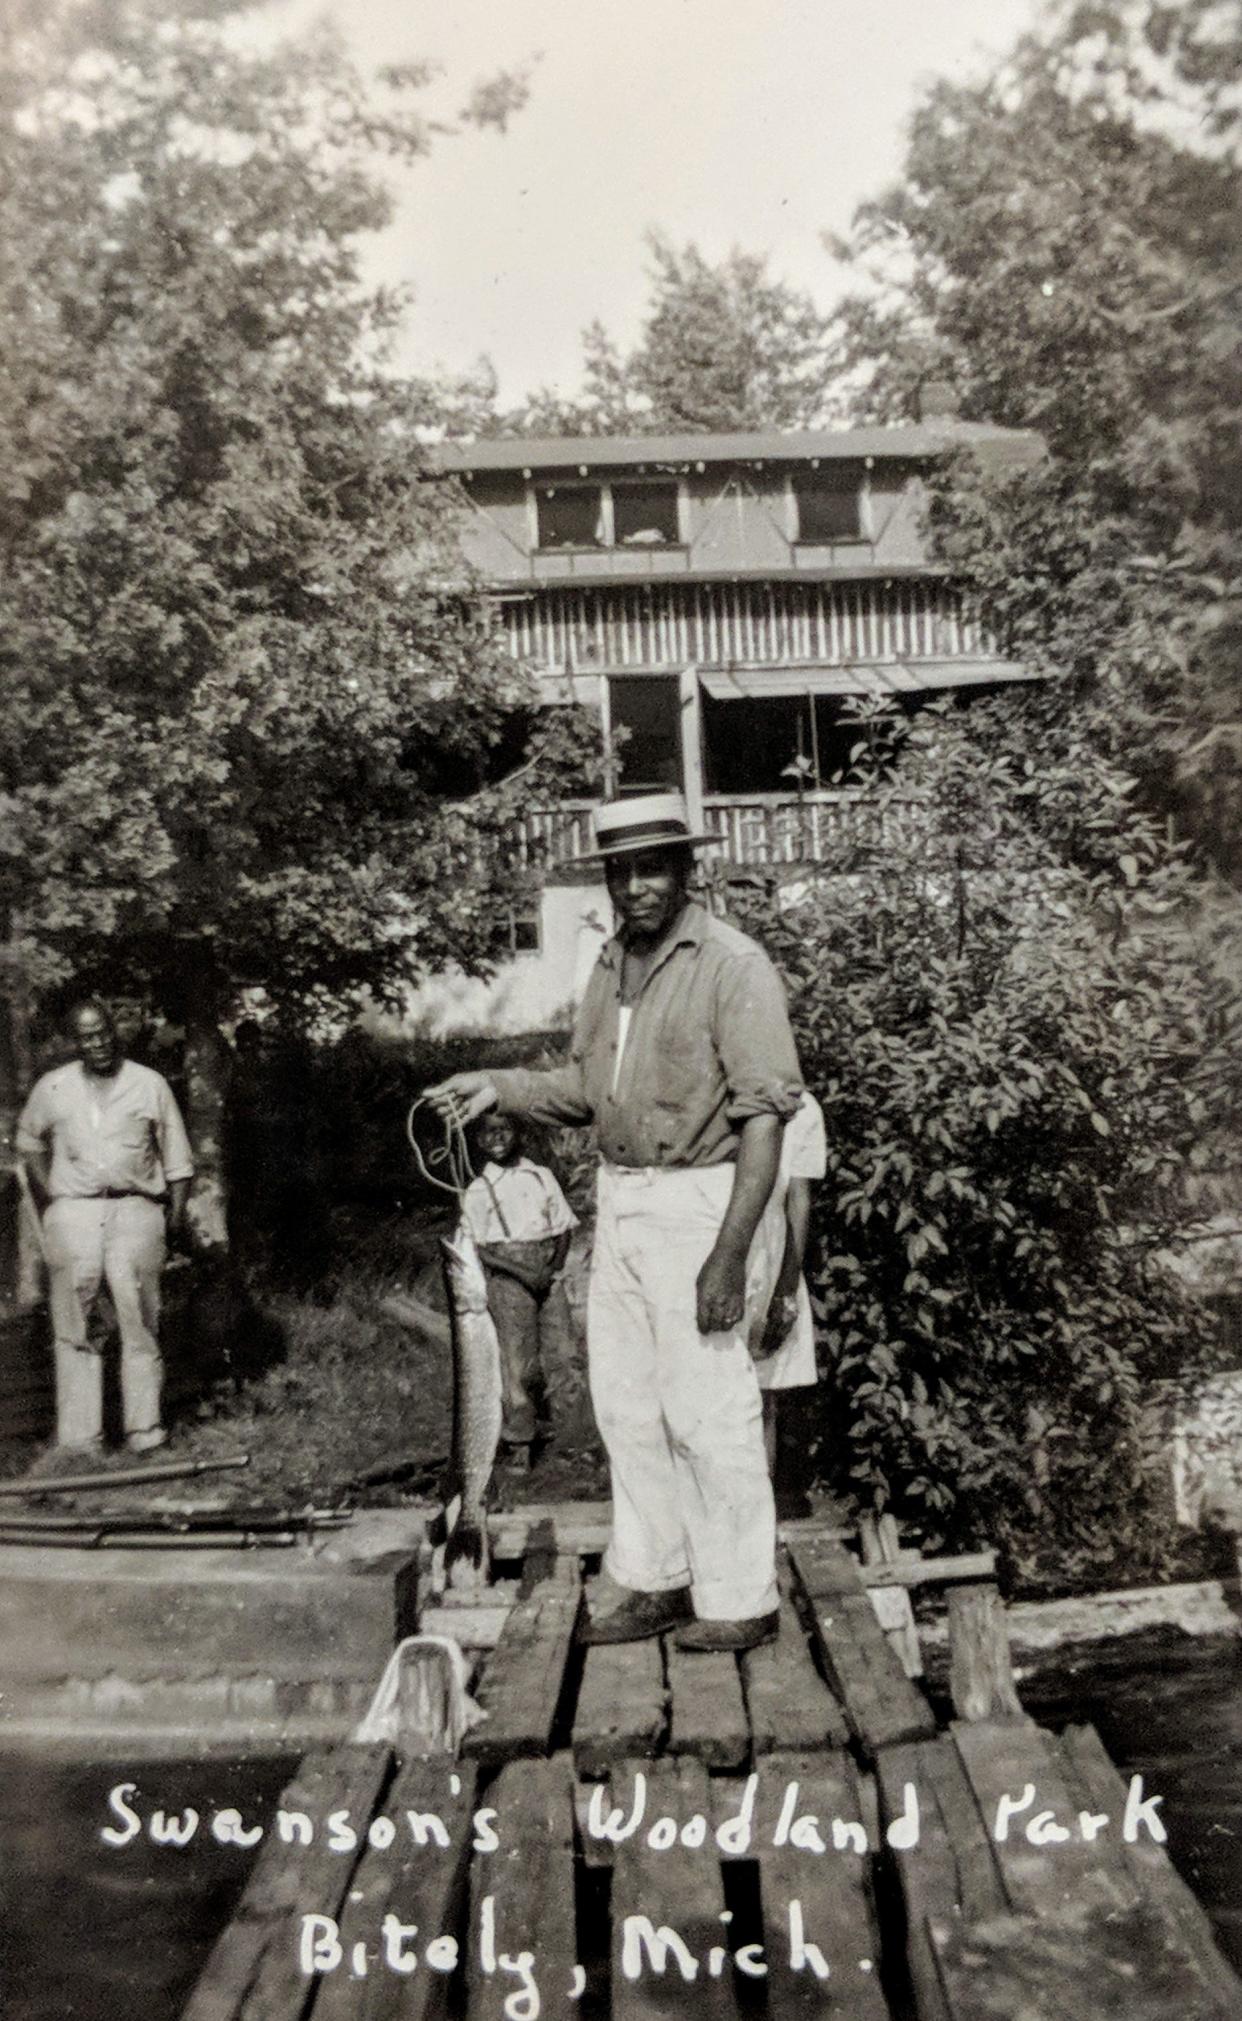 This is a postcard from Swanson’s Point at the Woodland Park resort in Newaygo County. Monroe native Ella Foster Auther made the resort a prime destination for blacks and others beginning in the 1920s.